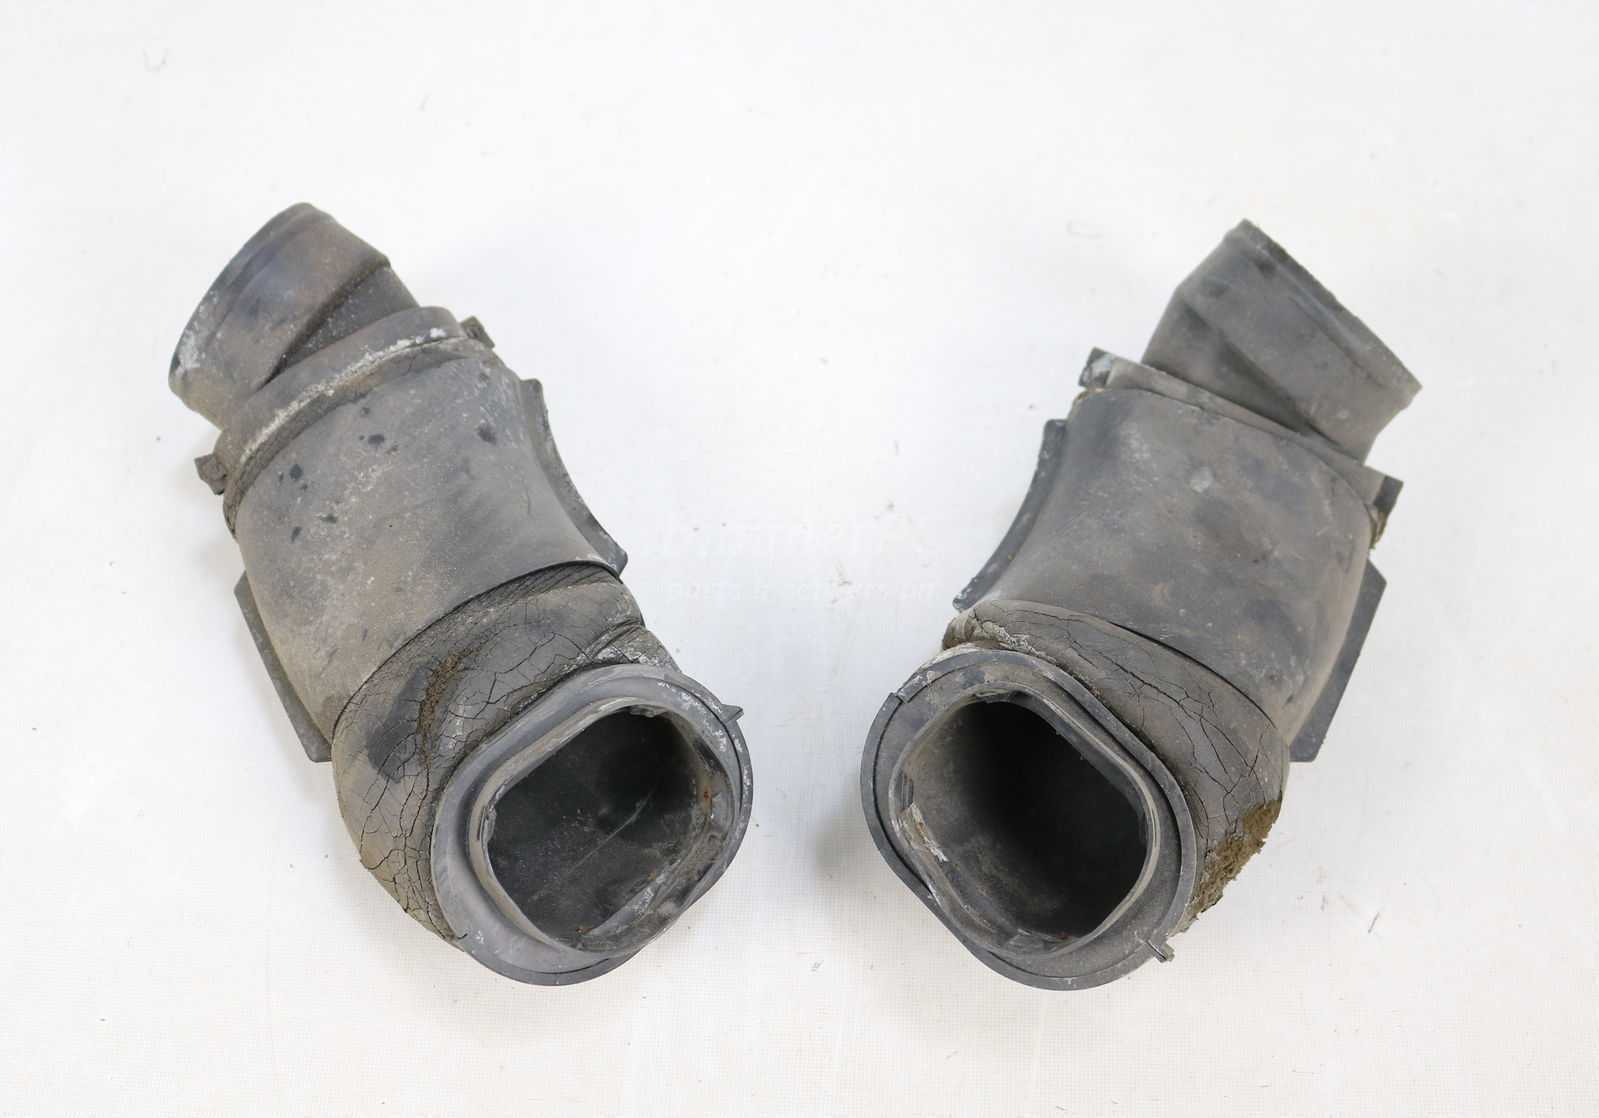 BMW E32 750iL Air Filter Housing Intake Ducts Boots M70 V12 1988-1994 OEM